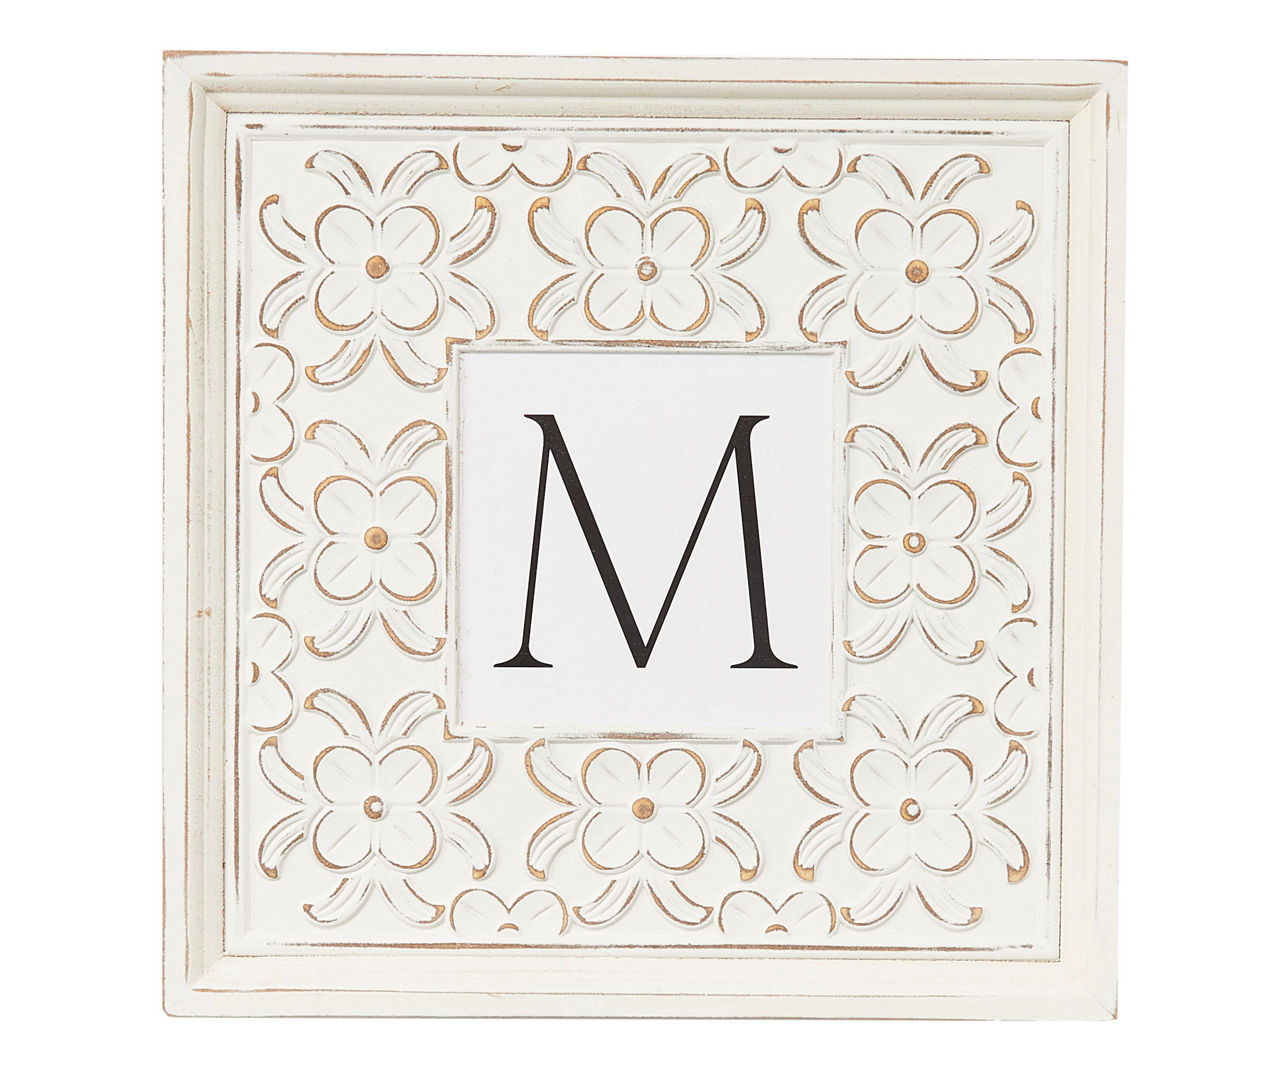 "M" White Distressed Carved Floral Monogram Square Wall Plaque